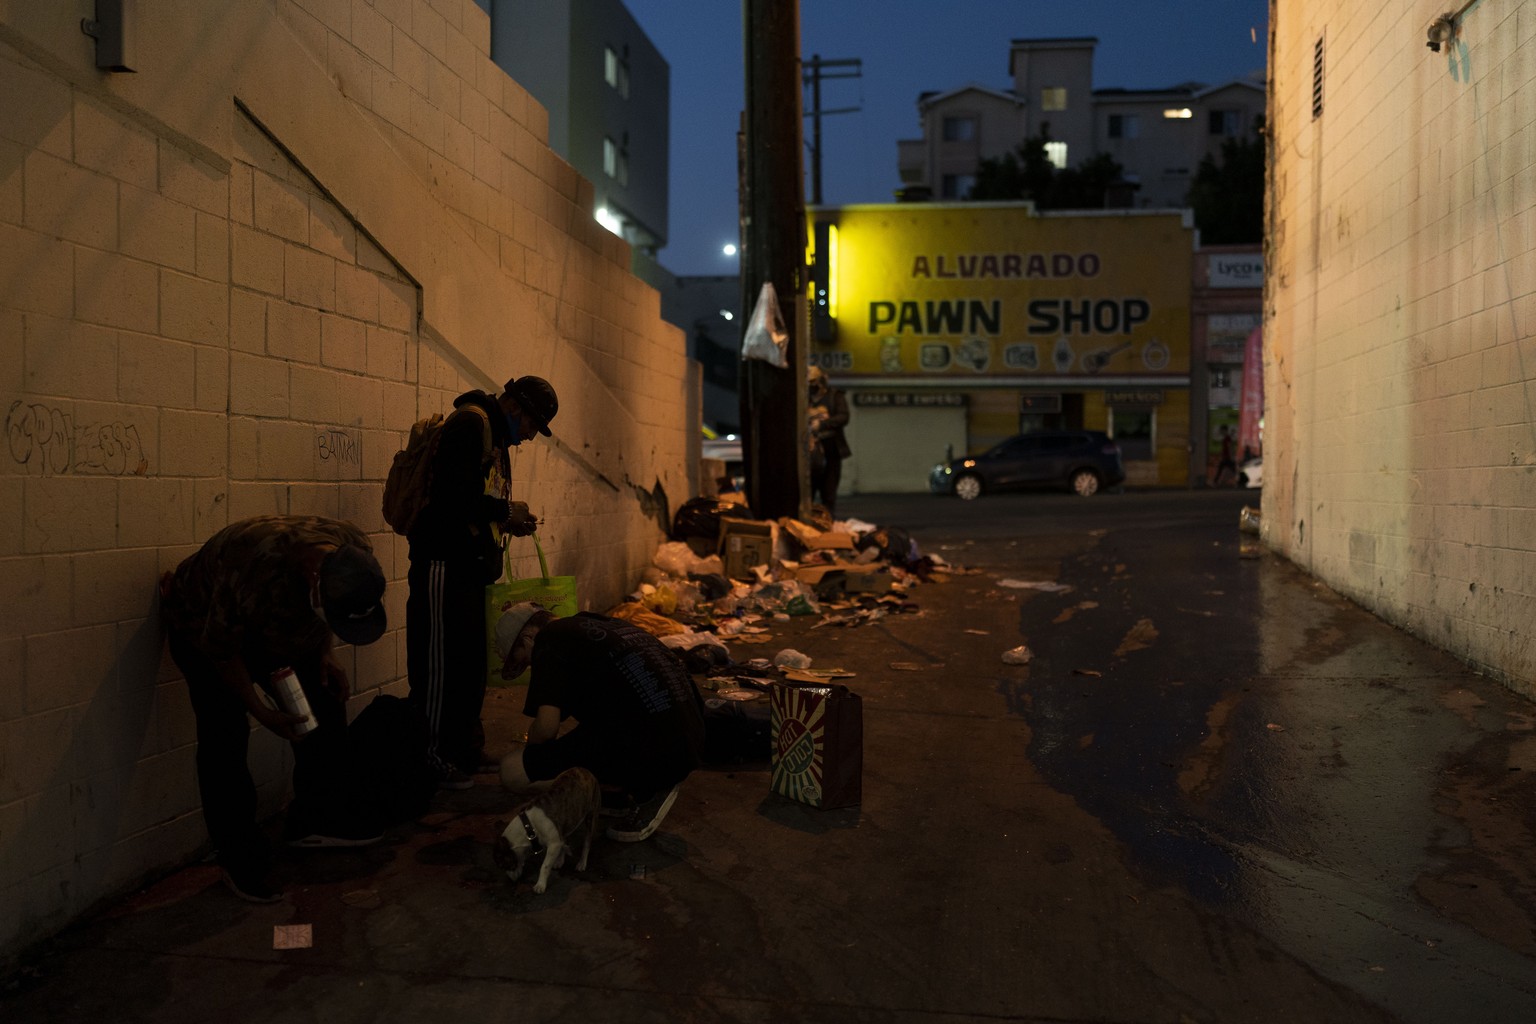 Drug addicts smoke fentanyl next to piles of trash in an alley in Los Angeles, Tuesday, Aug. 23, 2022. For too many people strung out on the drug, the sleep that follows a fentanyl hit is permanent. T ...